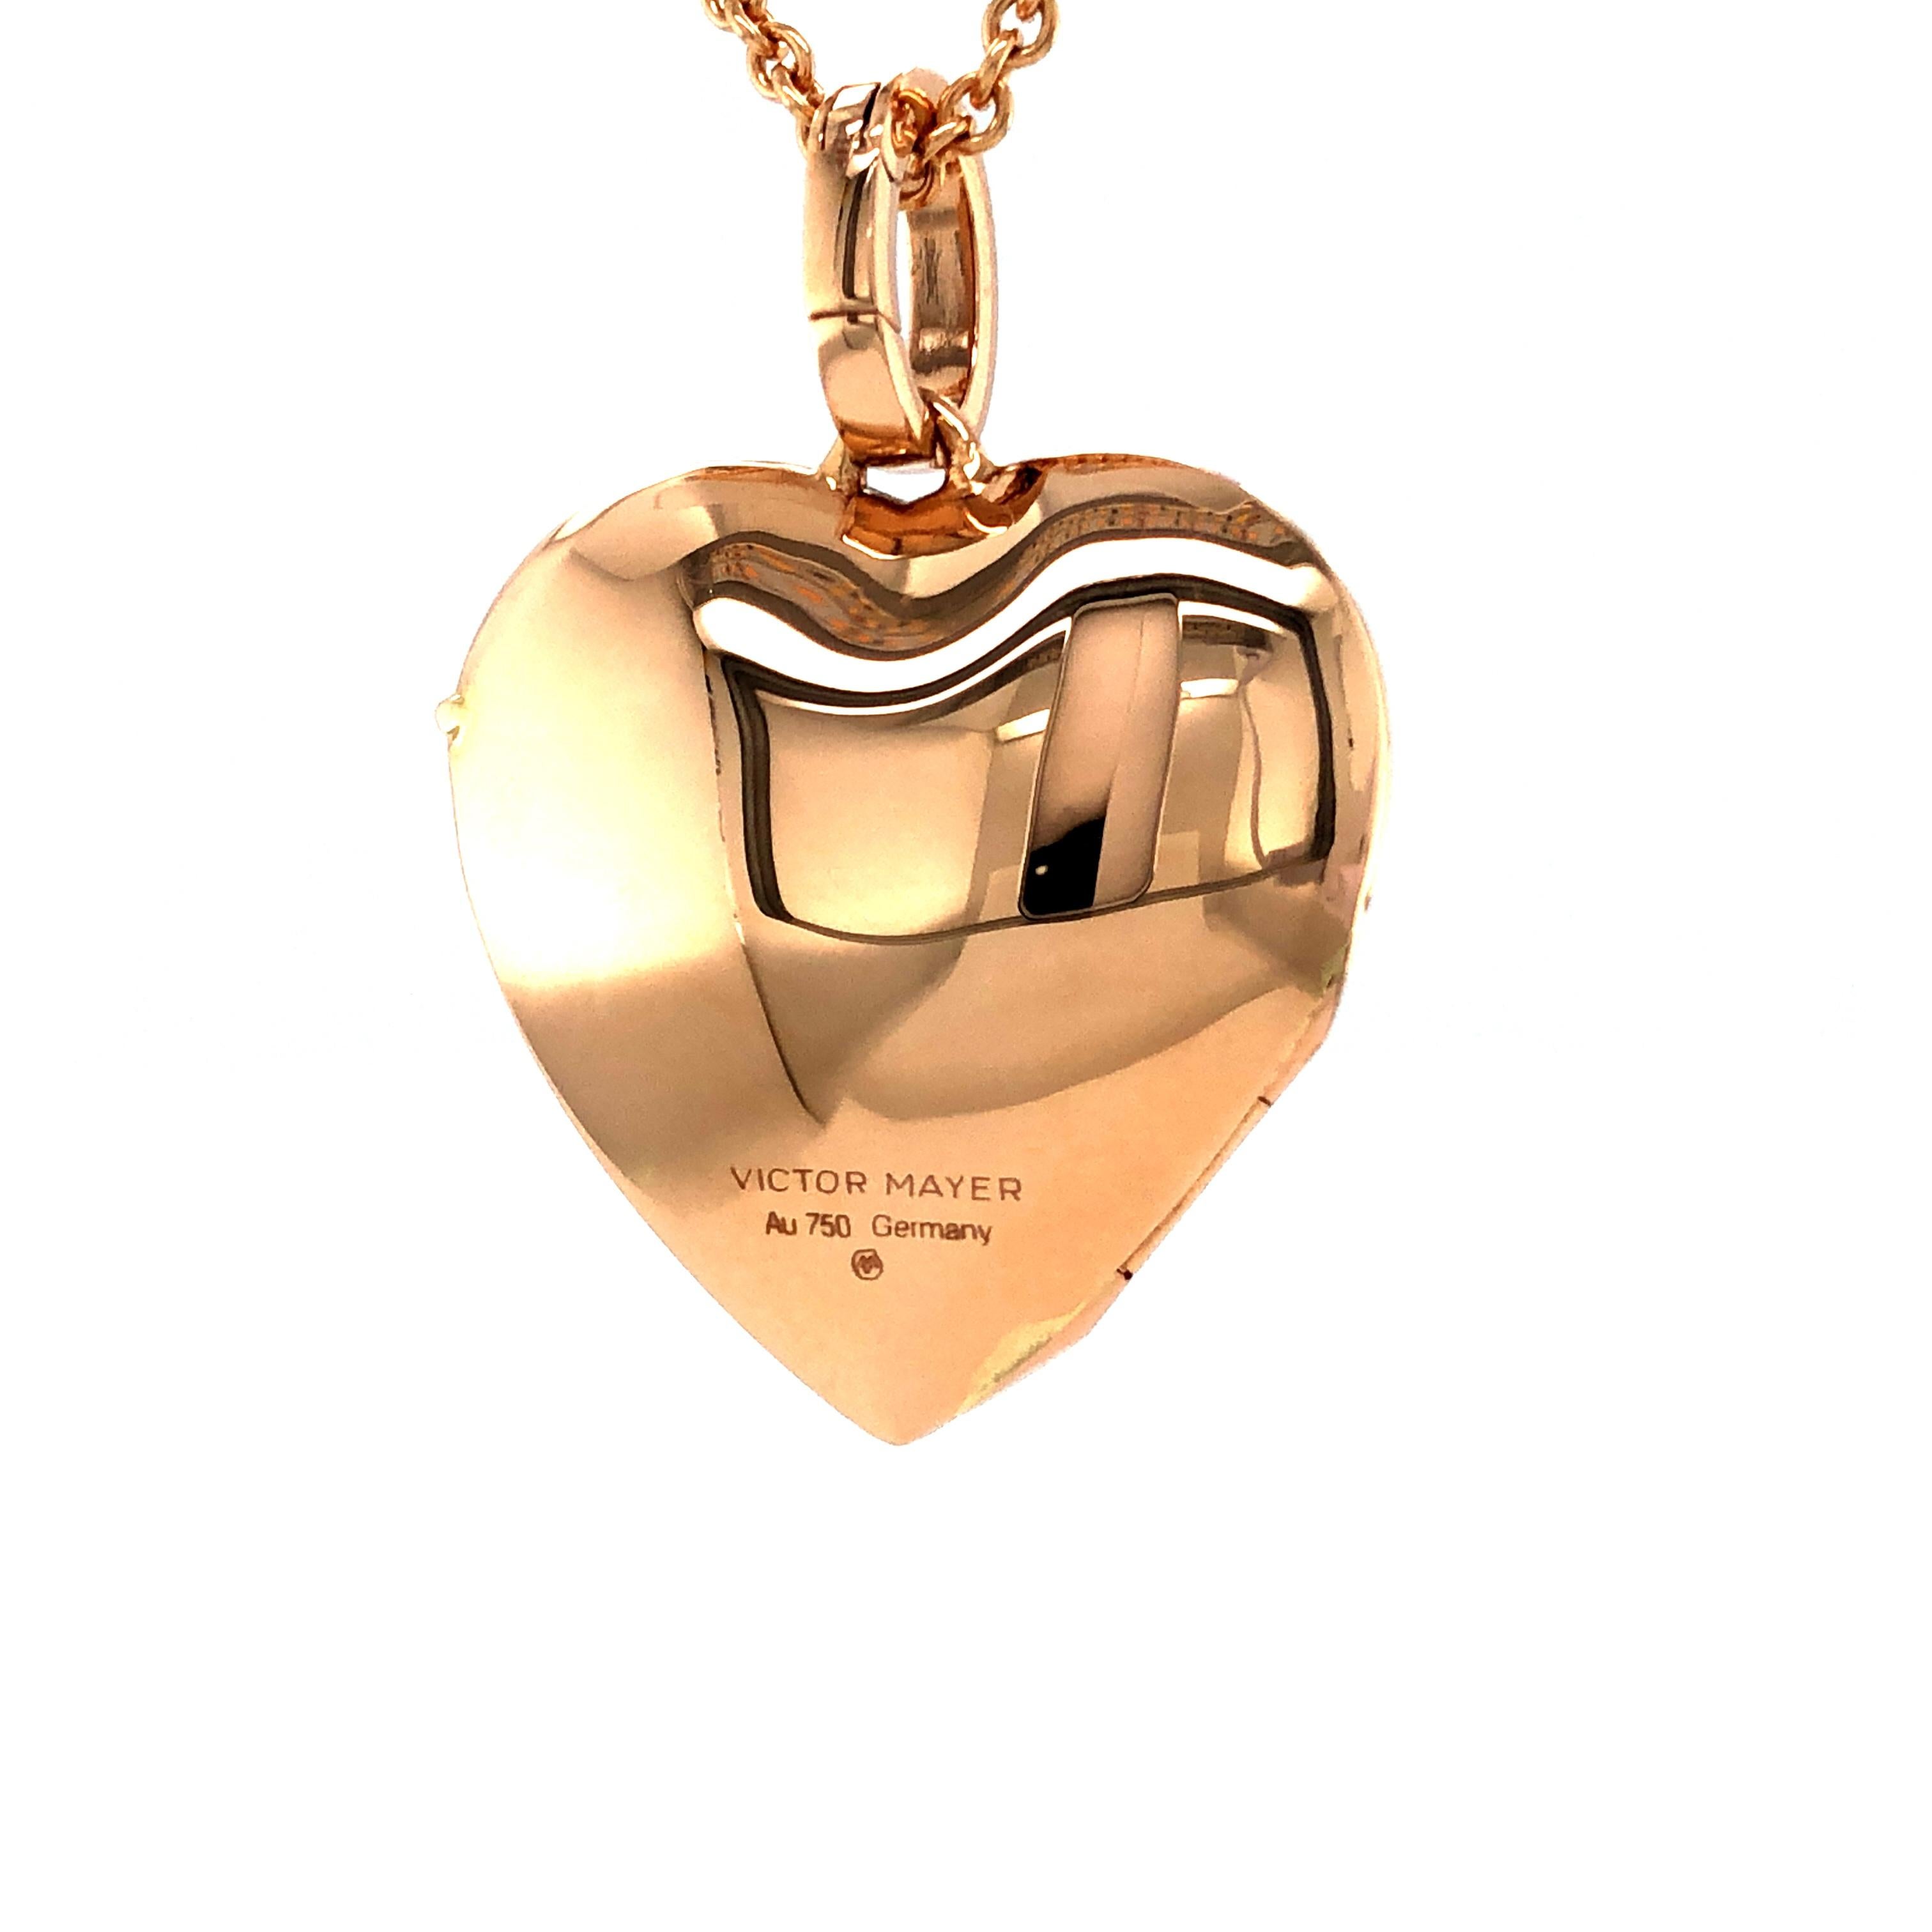 Victor Mayer customizable heart shaped polished pendant locket necklace 18k rose gold, Hallmark collection, measurements app. 25 mm x 25 mm

About the creator Victor Mayer
Victor Mayer is internationally renowned for elegant timeless designs and